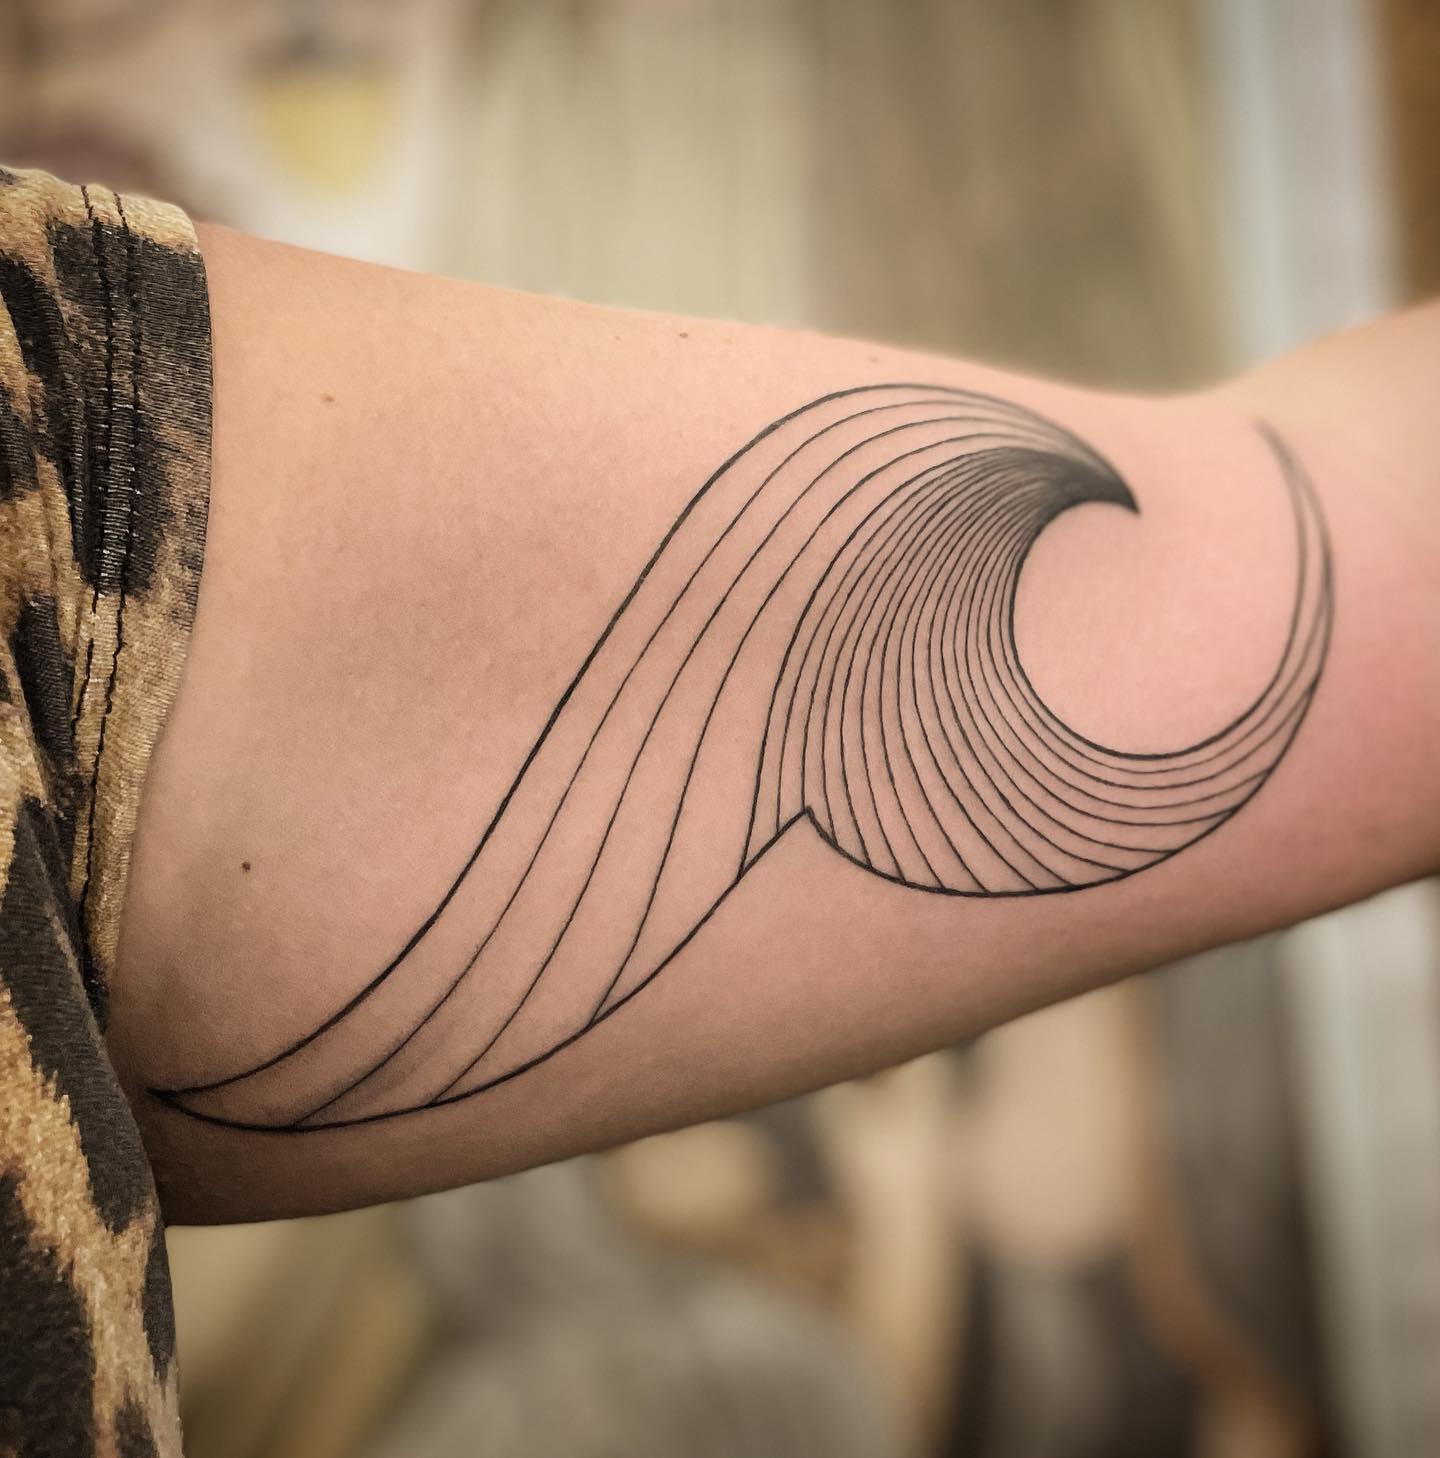 30 Wave Tattoo Design Ideas For Your Inner Coast  100 Tattoos